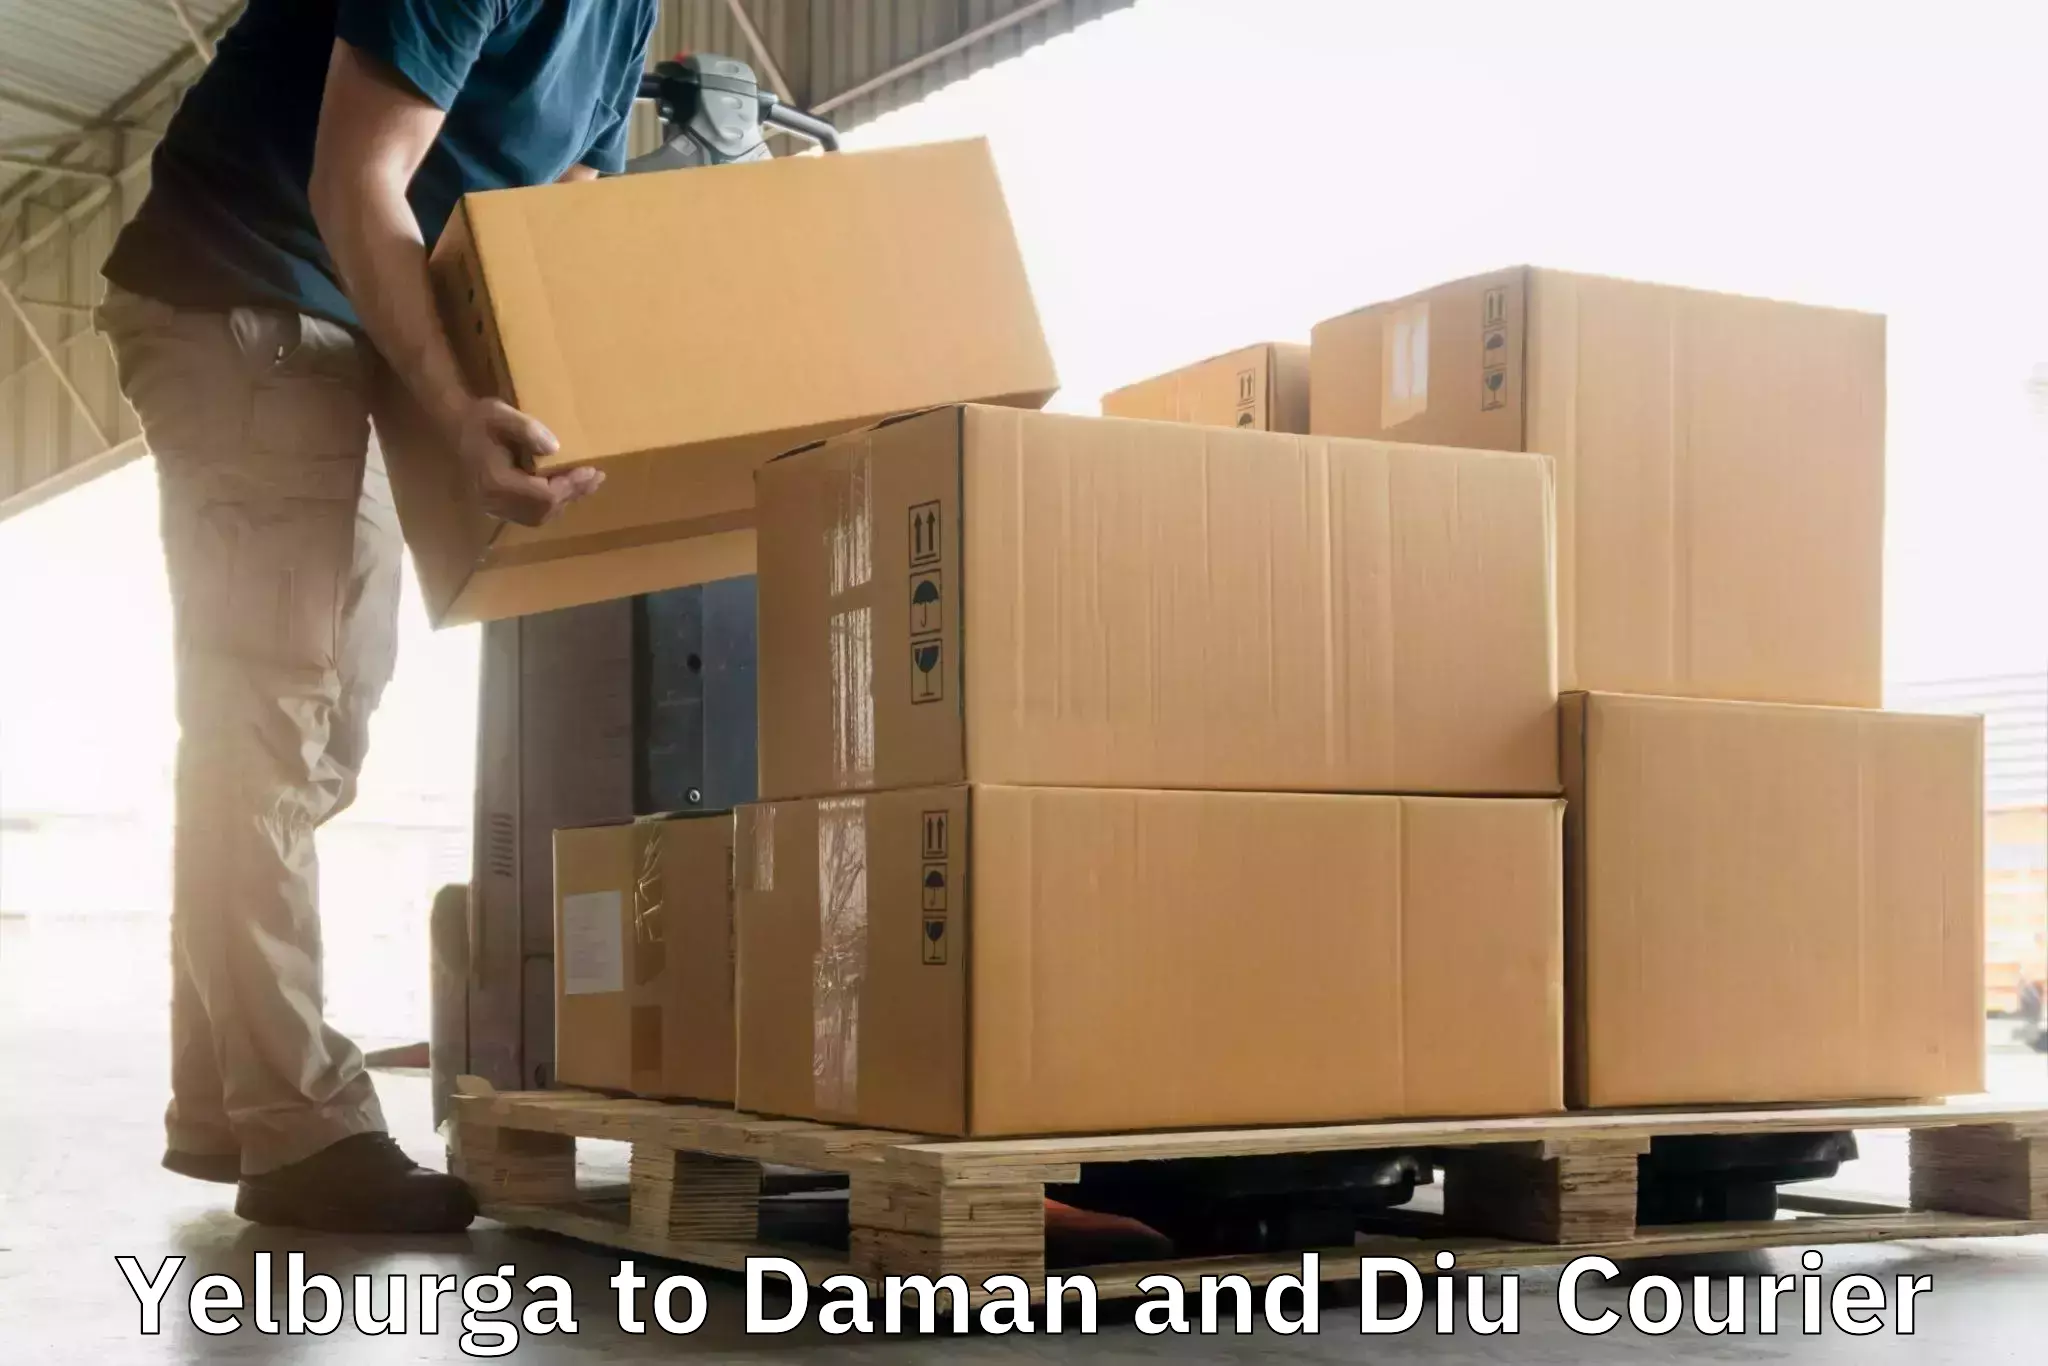 Multi-national courier services Yelburga to Daman and Diu